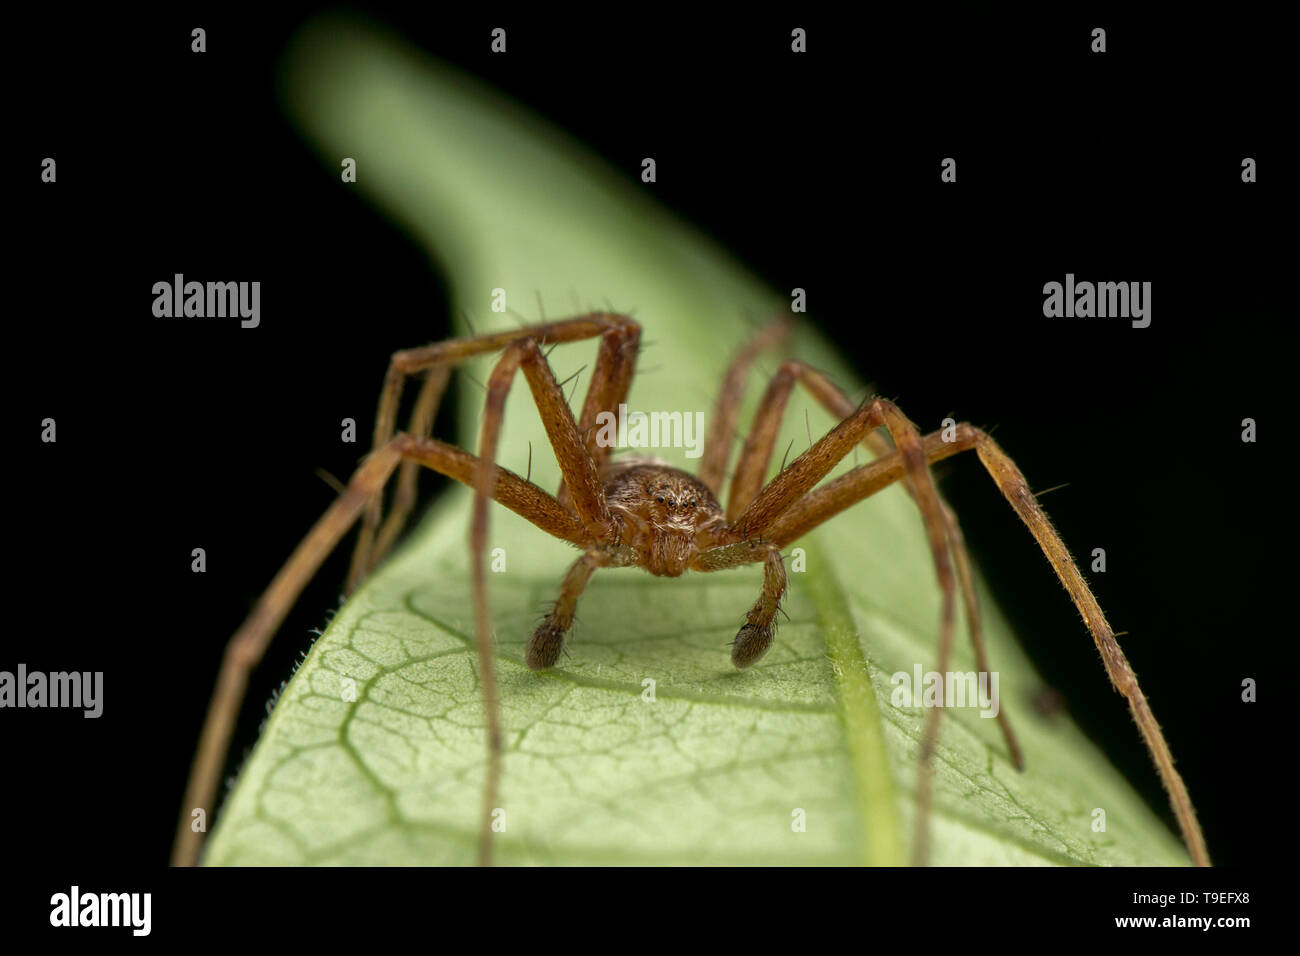 Phylodromidae Sp. male spider posing on green leaf Stock Photo